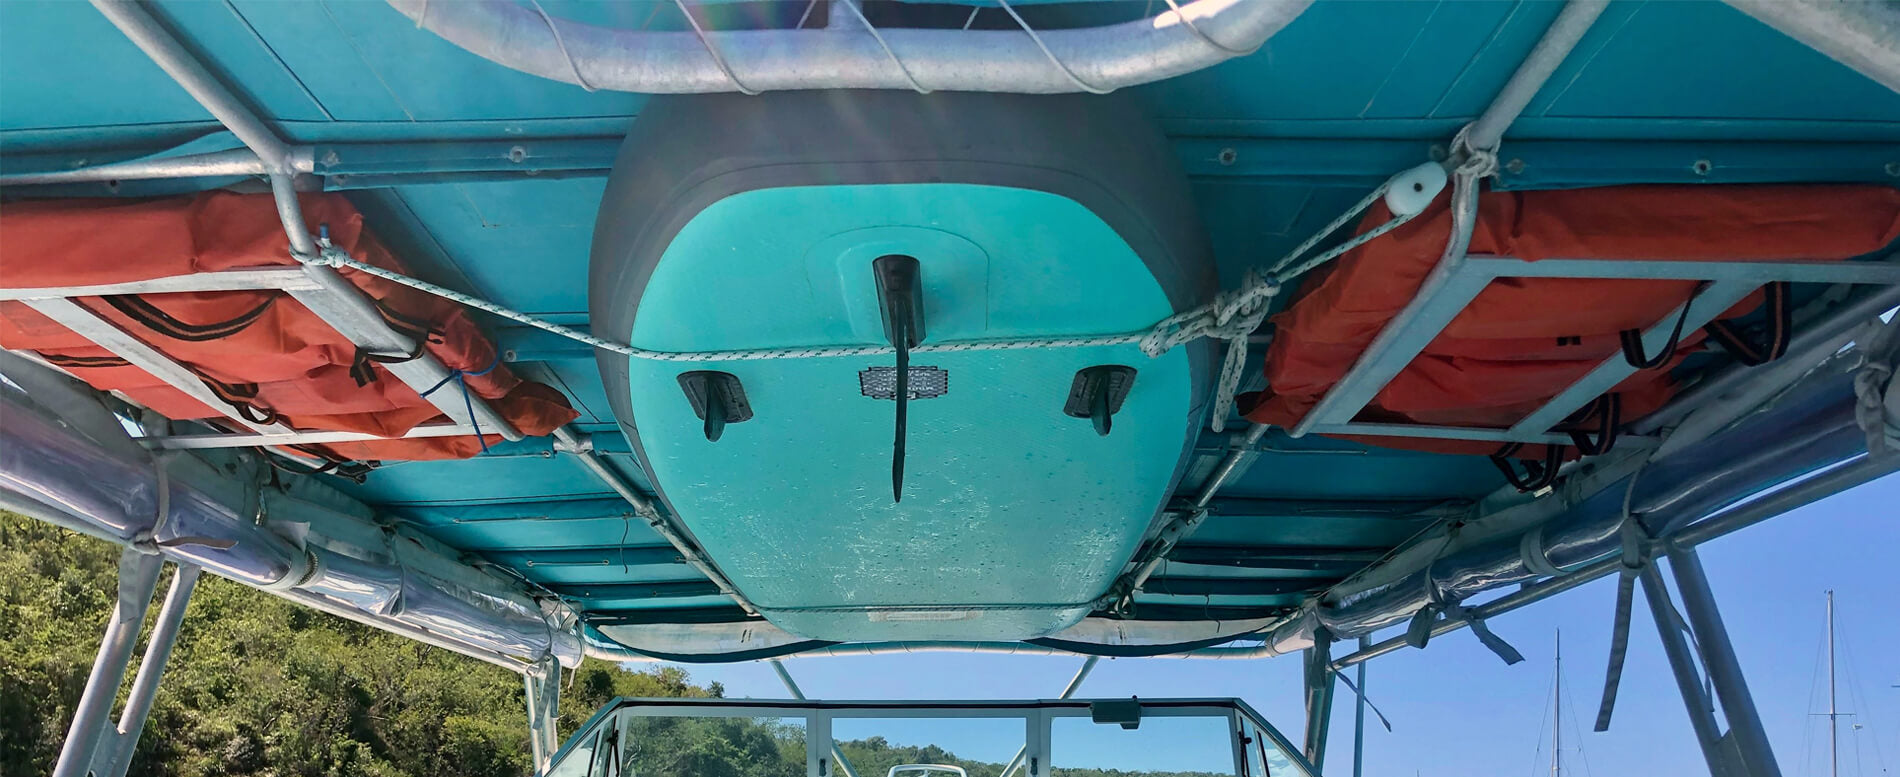 GILI paddle board attached on a boat ceiling using a rack